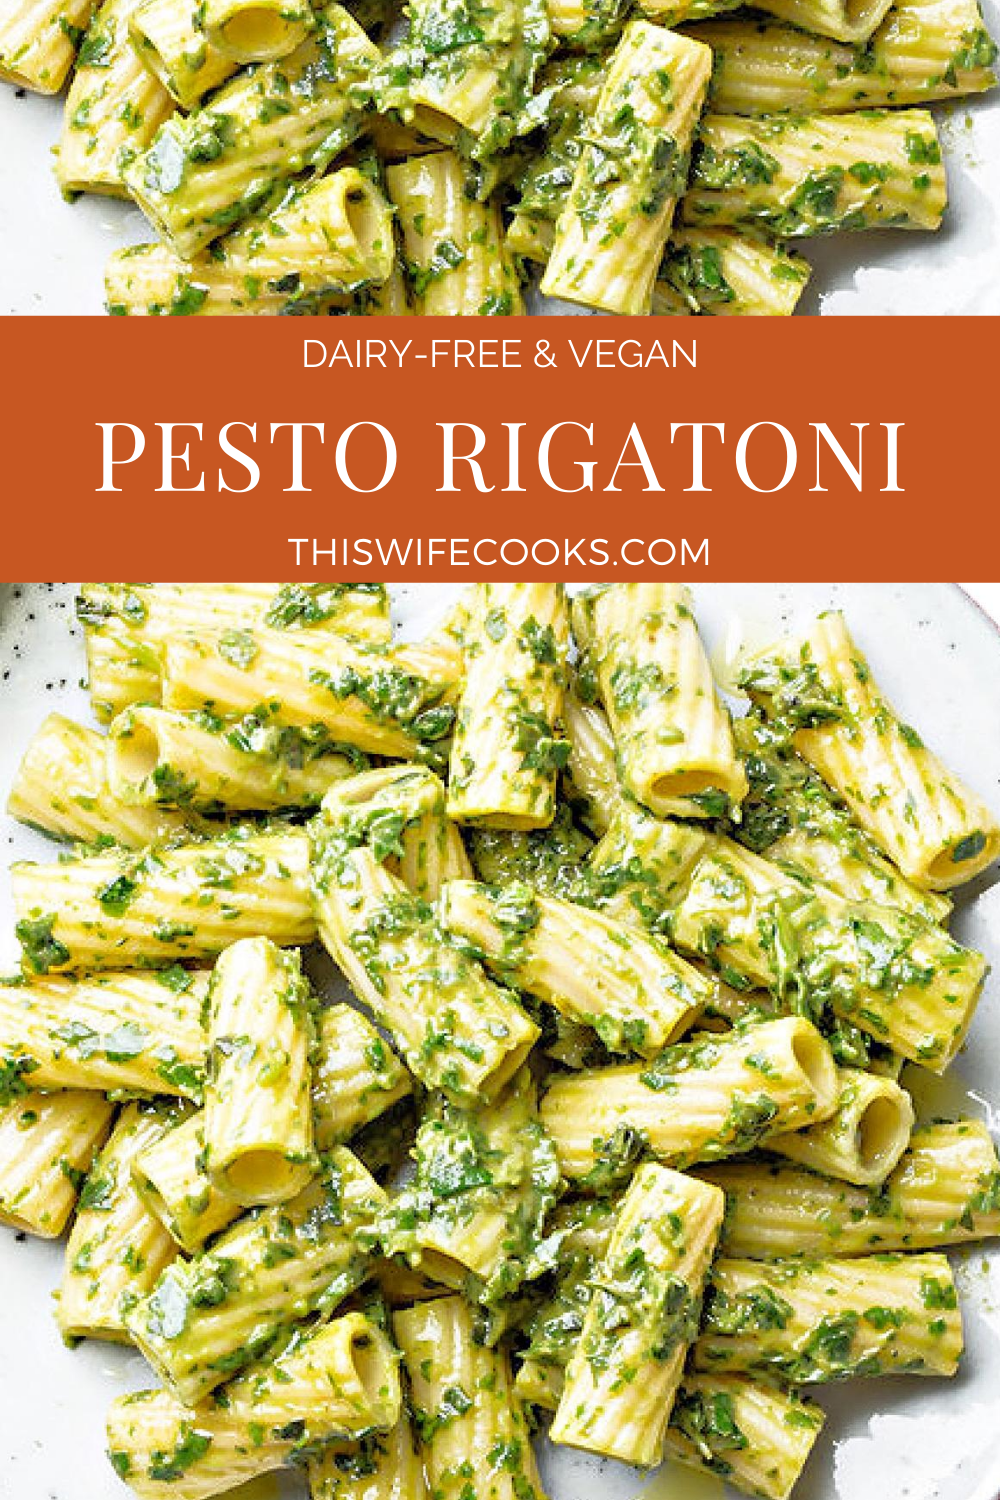 Pesto Rigatoni ~ Fresh homemade basil pesto tossed with rigatoni pasta for a quick and easy weeknight meal. Ready to serve in 20 minutes or less! via @thiswifecooks